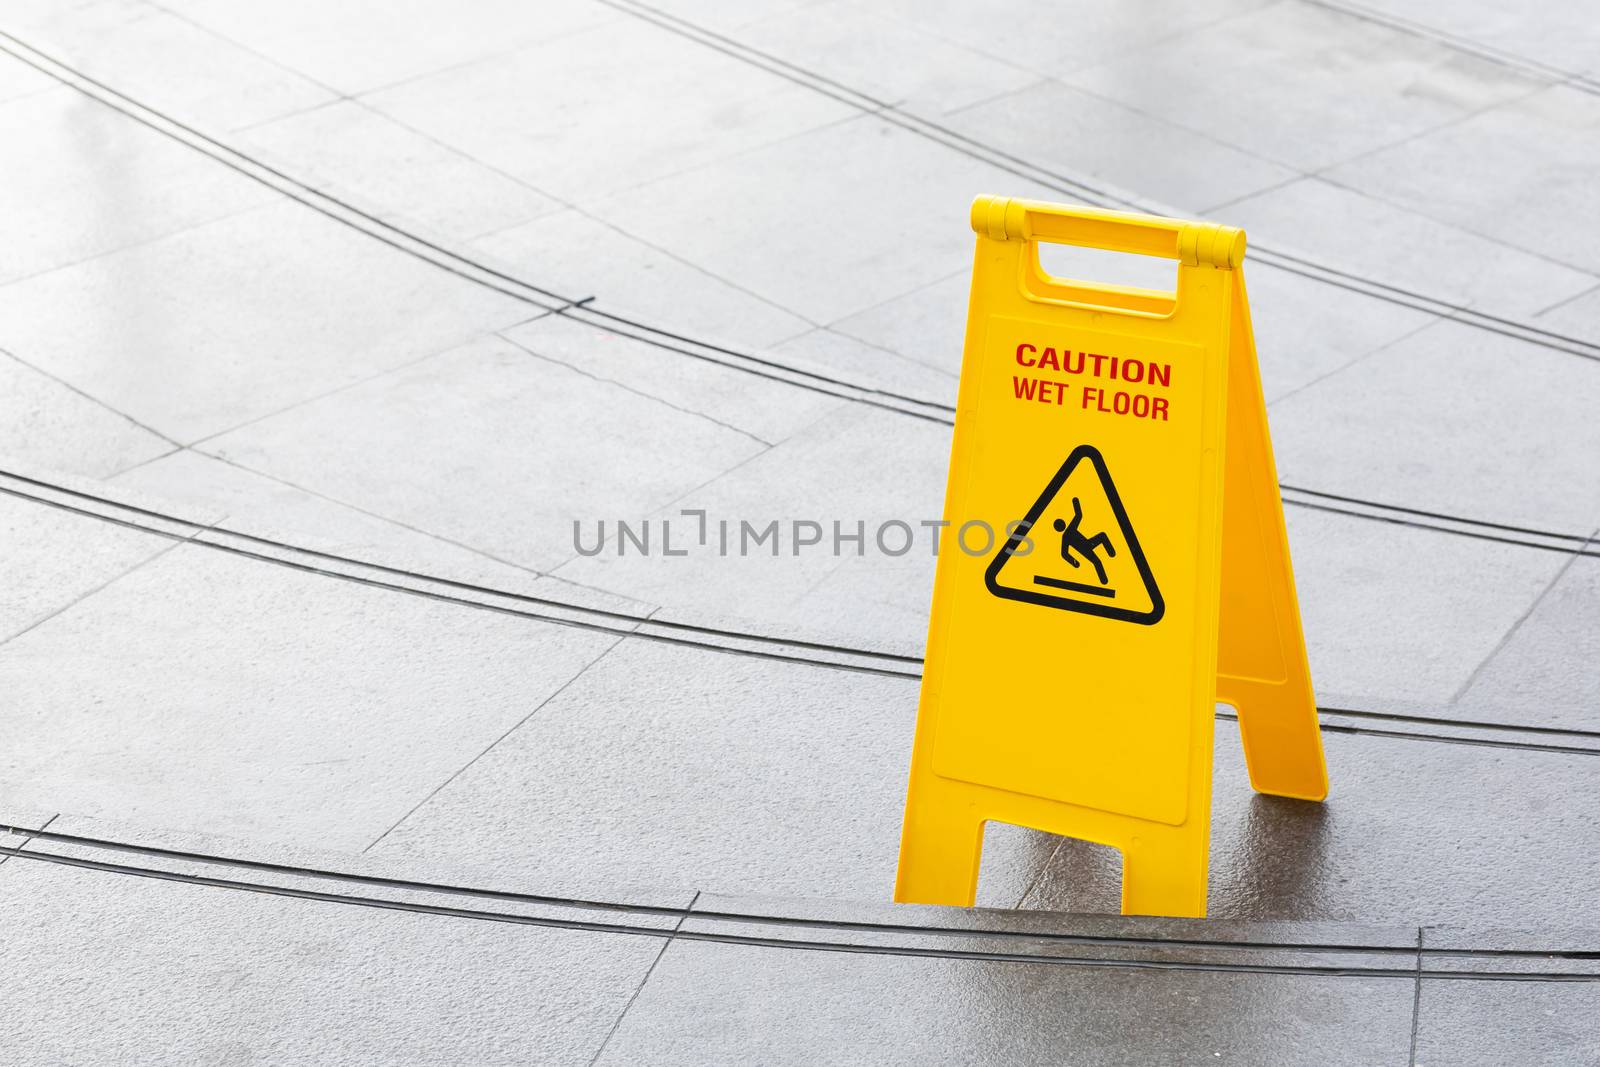 slippery warning safety yellow caution sign symbol equipment stairs notice office space professional wet floor danger plastic slip accident hazard